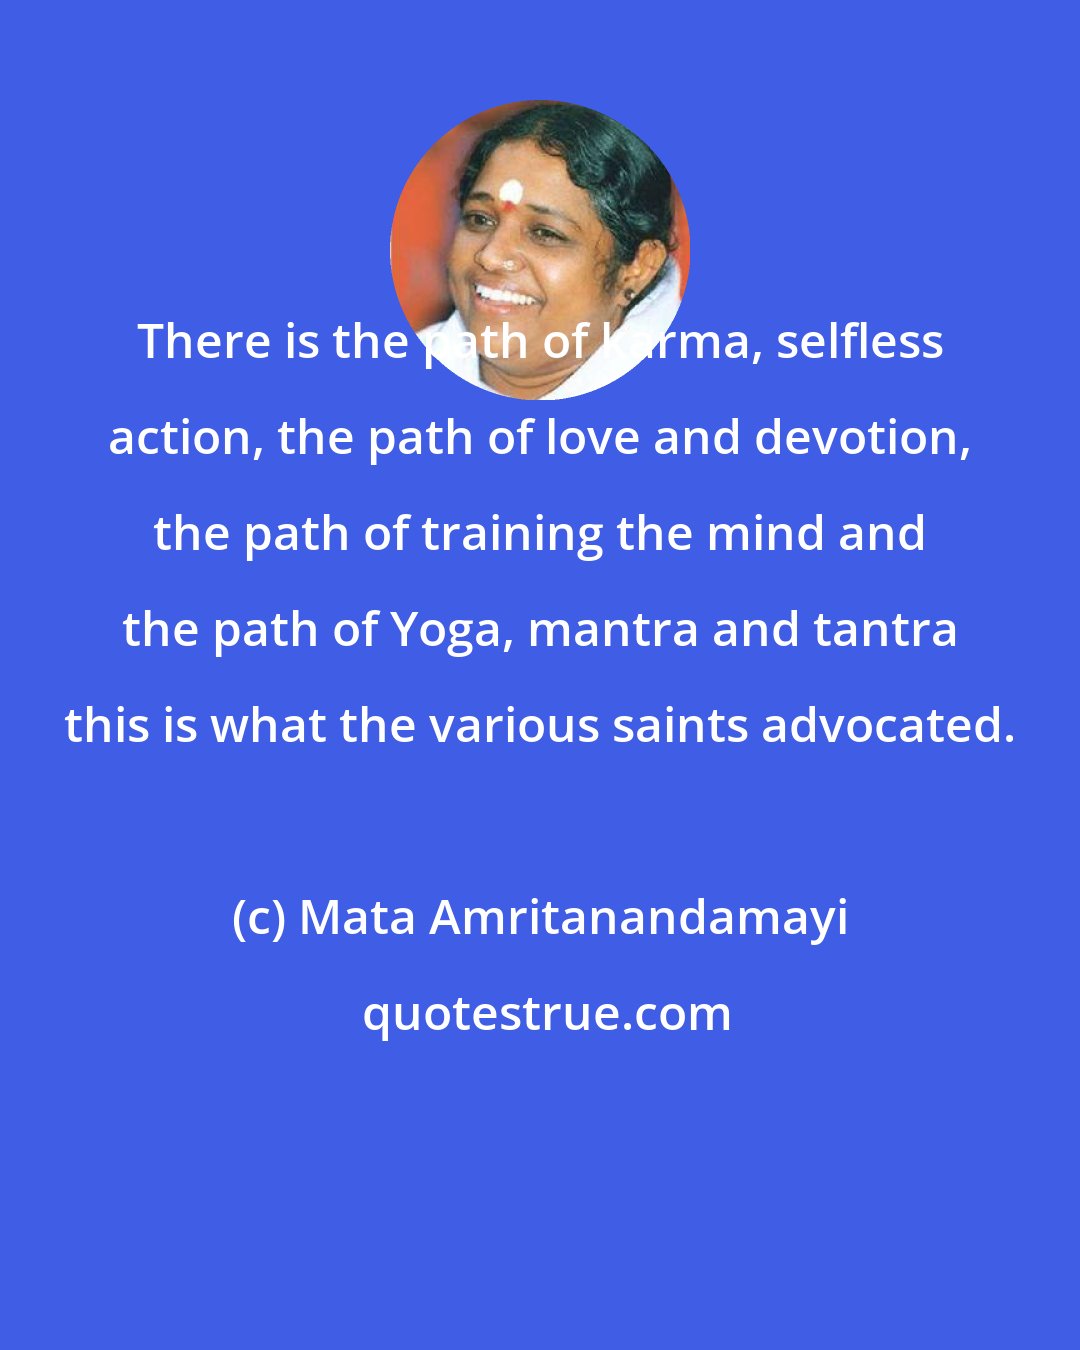 Mata Amritanandamayi: There is the path of karma, selfless action, the path of love and devotion, the path of training the mind and the path of Yoga, mantra and tantra this is what the various saints advocated.